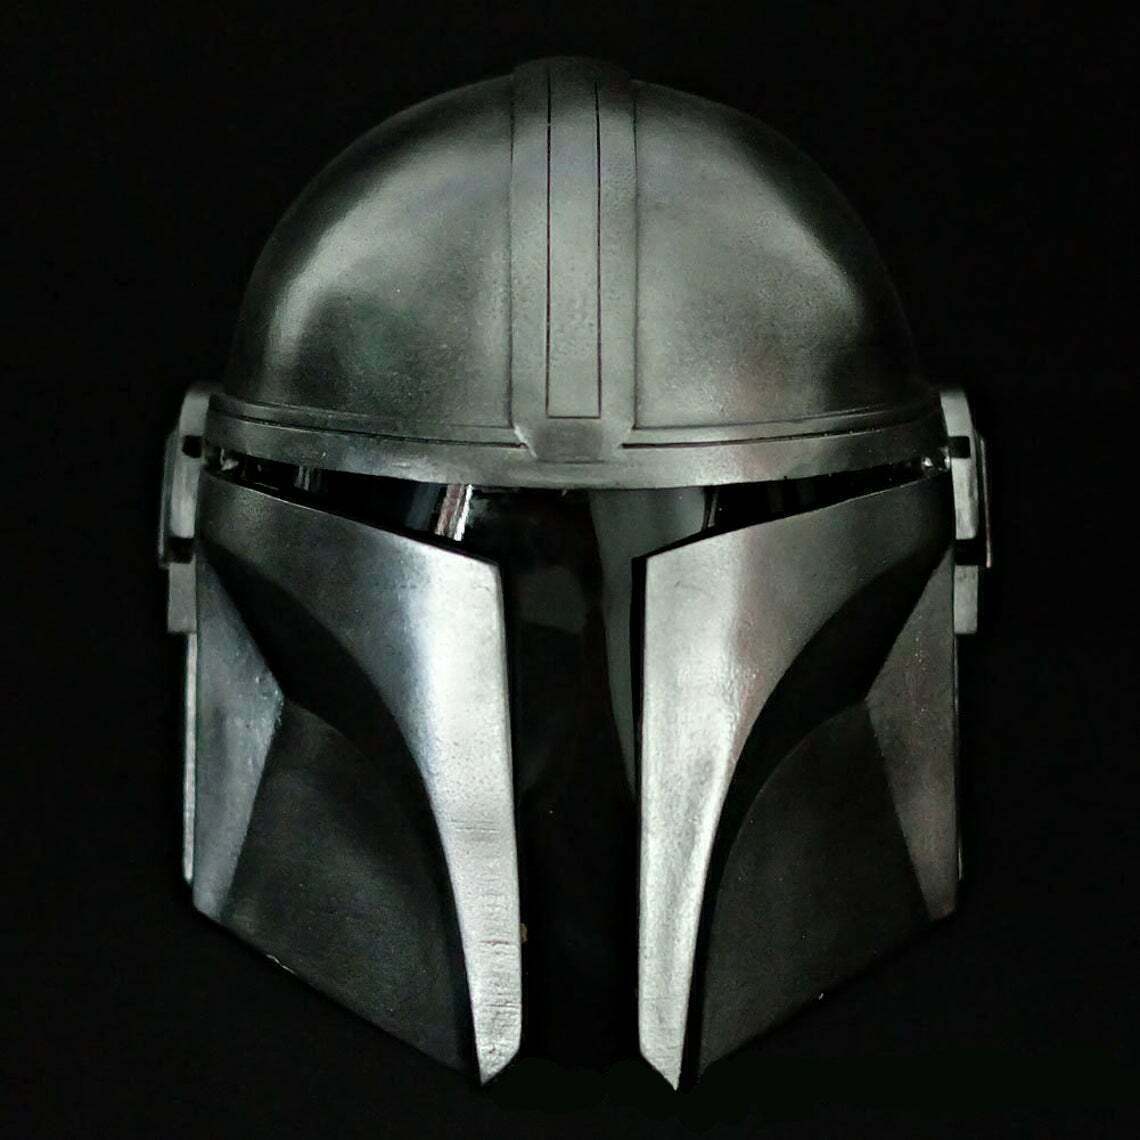 Steel Mandalorian Helmet With Liner and Chin Strap (For LARP/Costumes/Role Plays